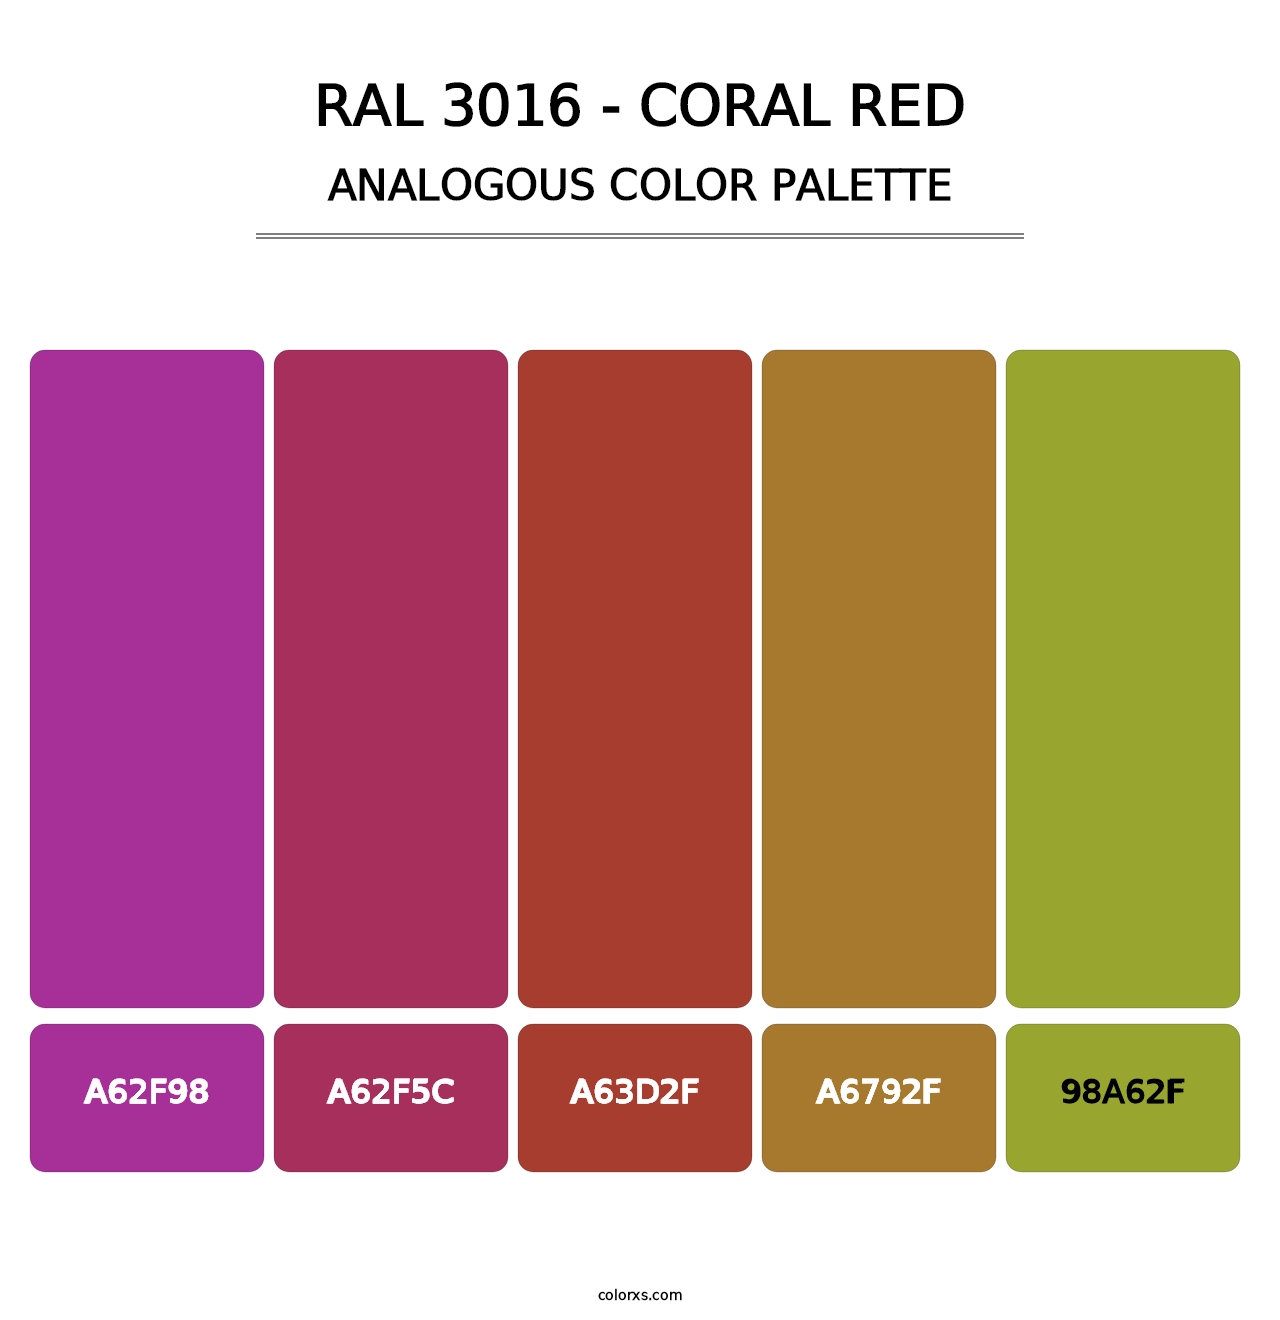 RAL 3016 - Coral Red - Analogous Color Palette